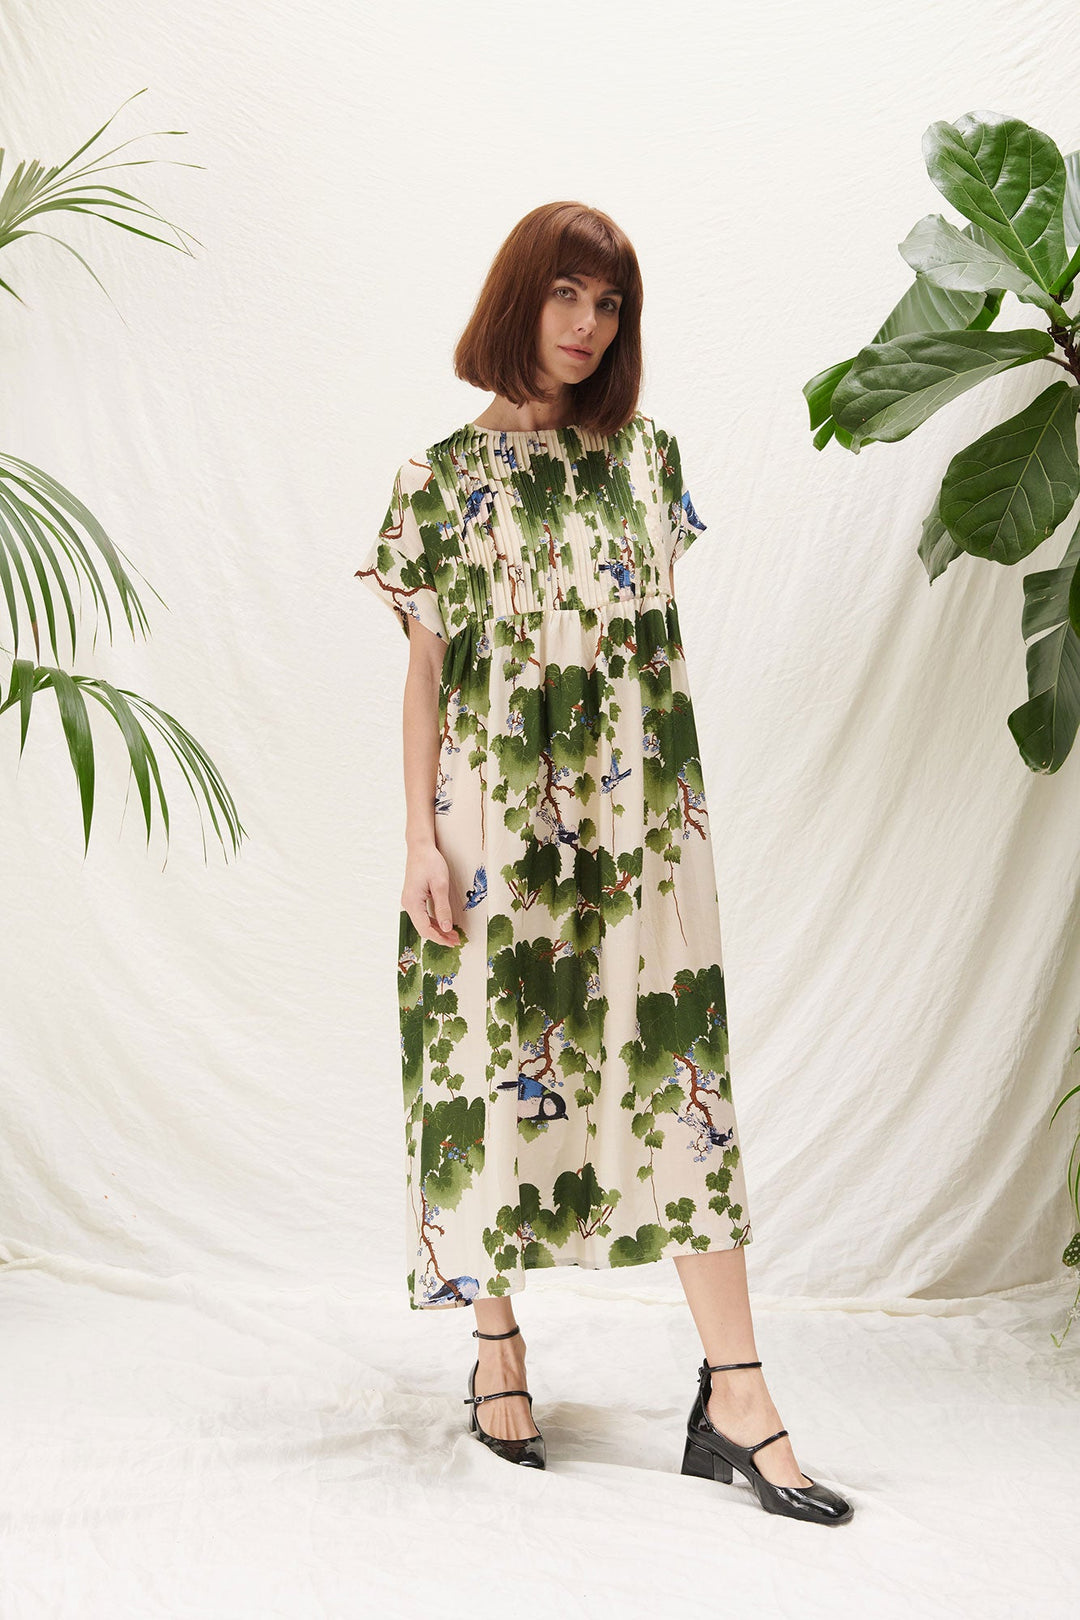 leafy green printed smock dress by one hundred stars